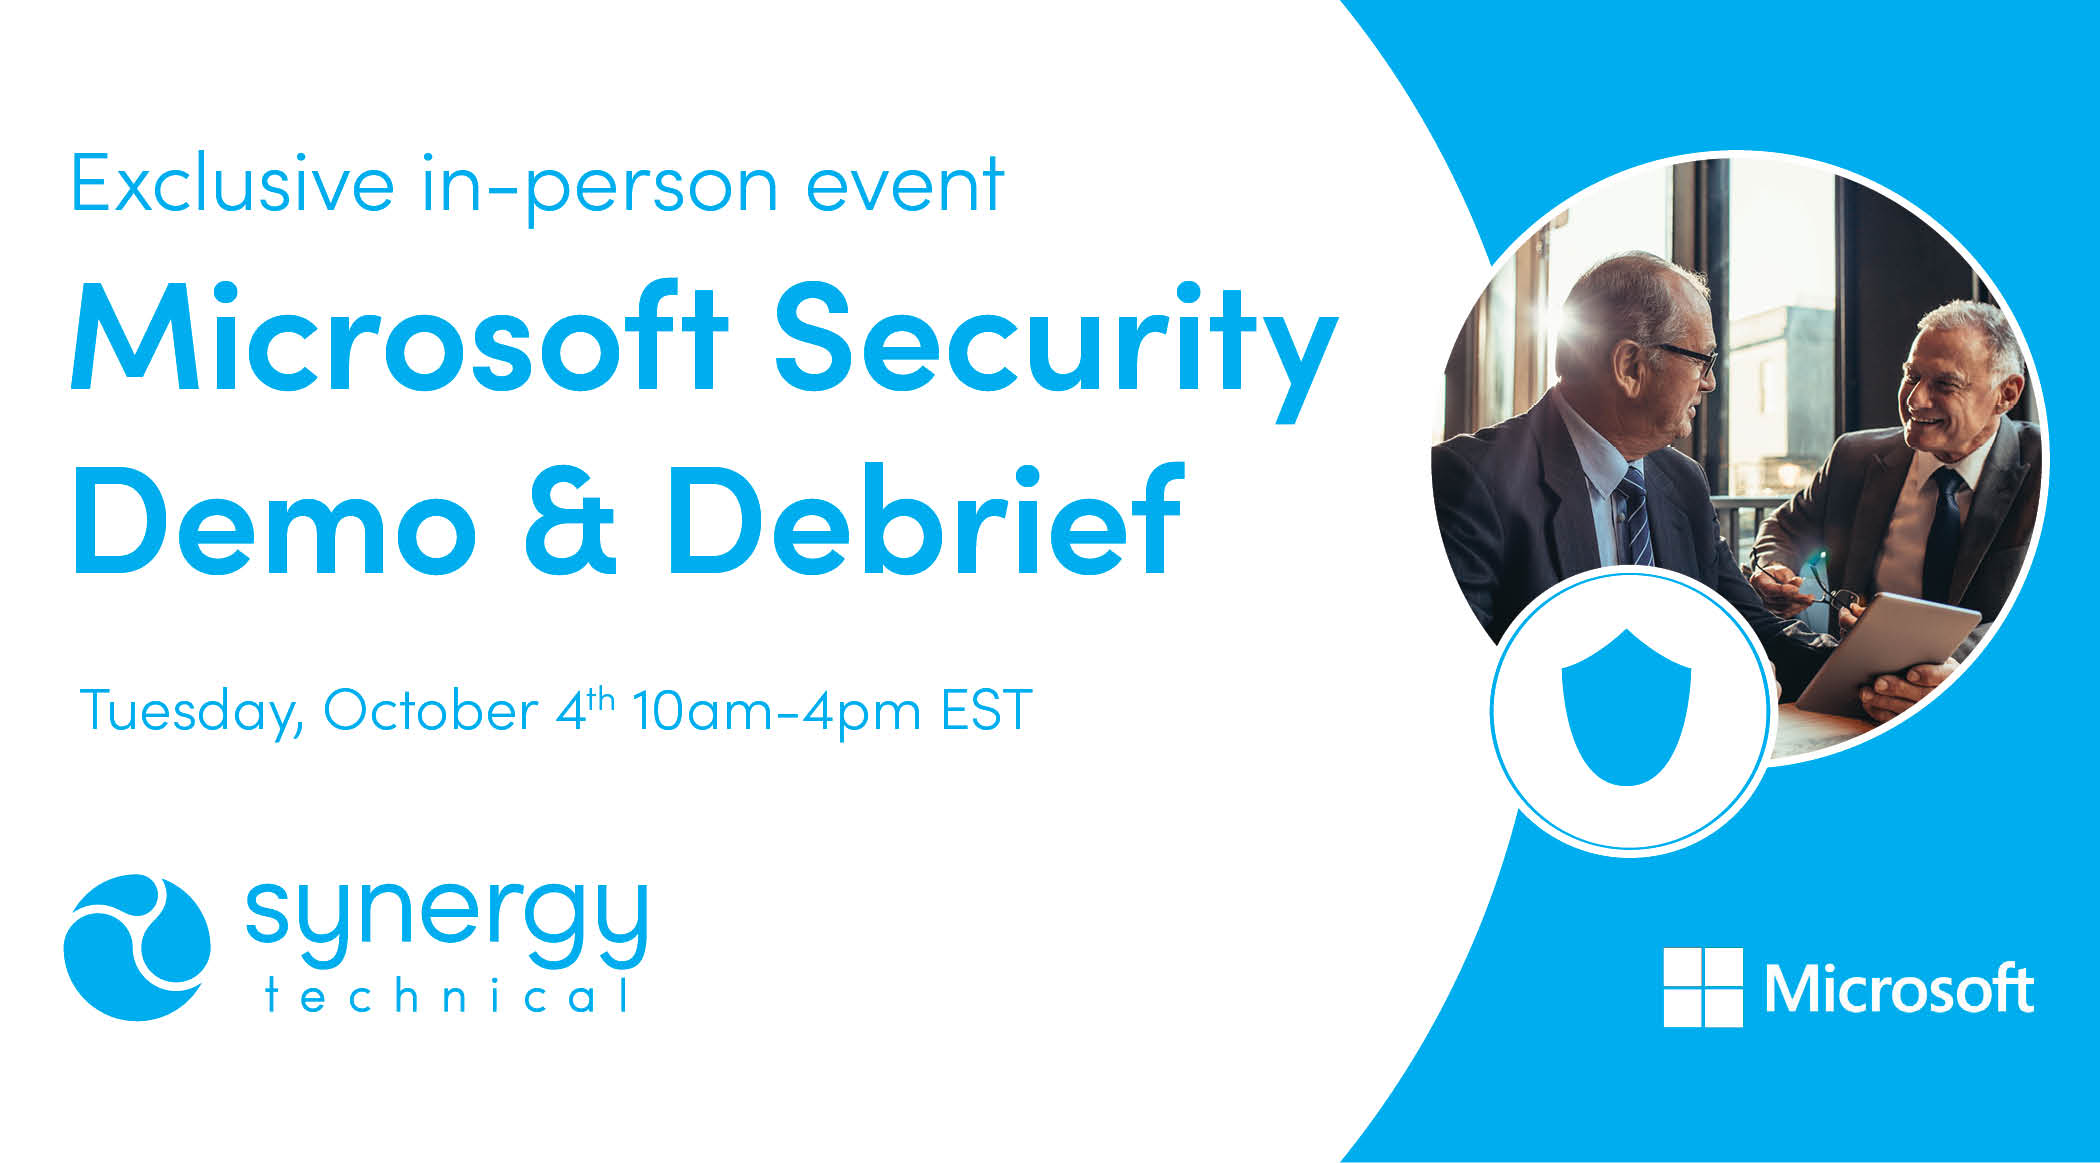 Microsoft Security Debrief and Immersion Experience